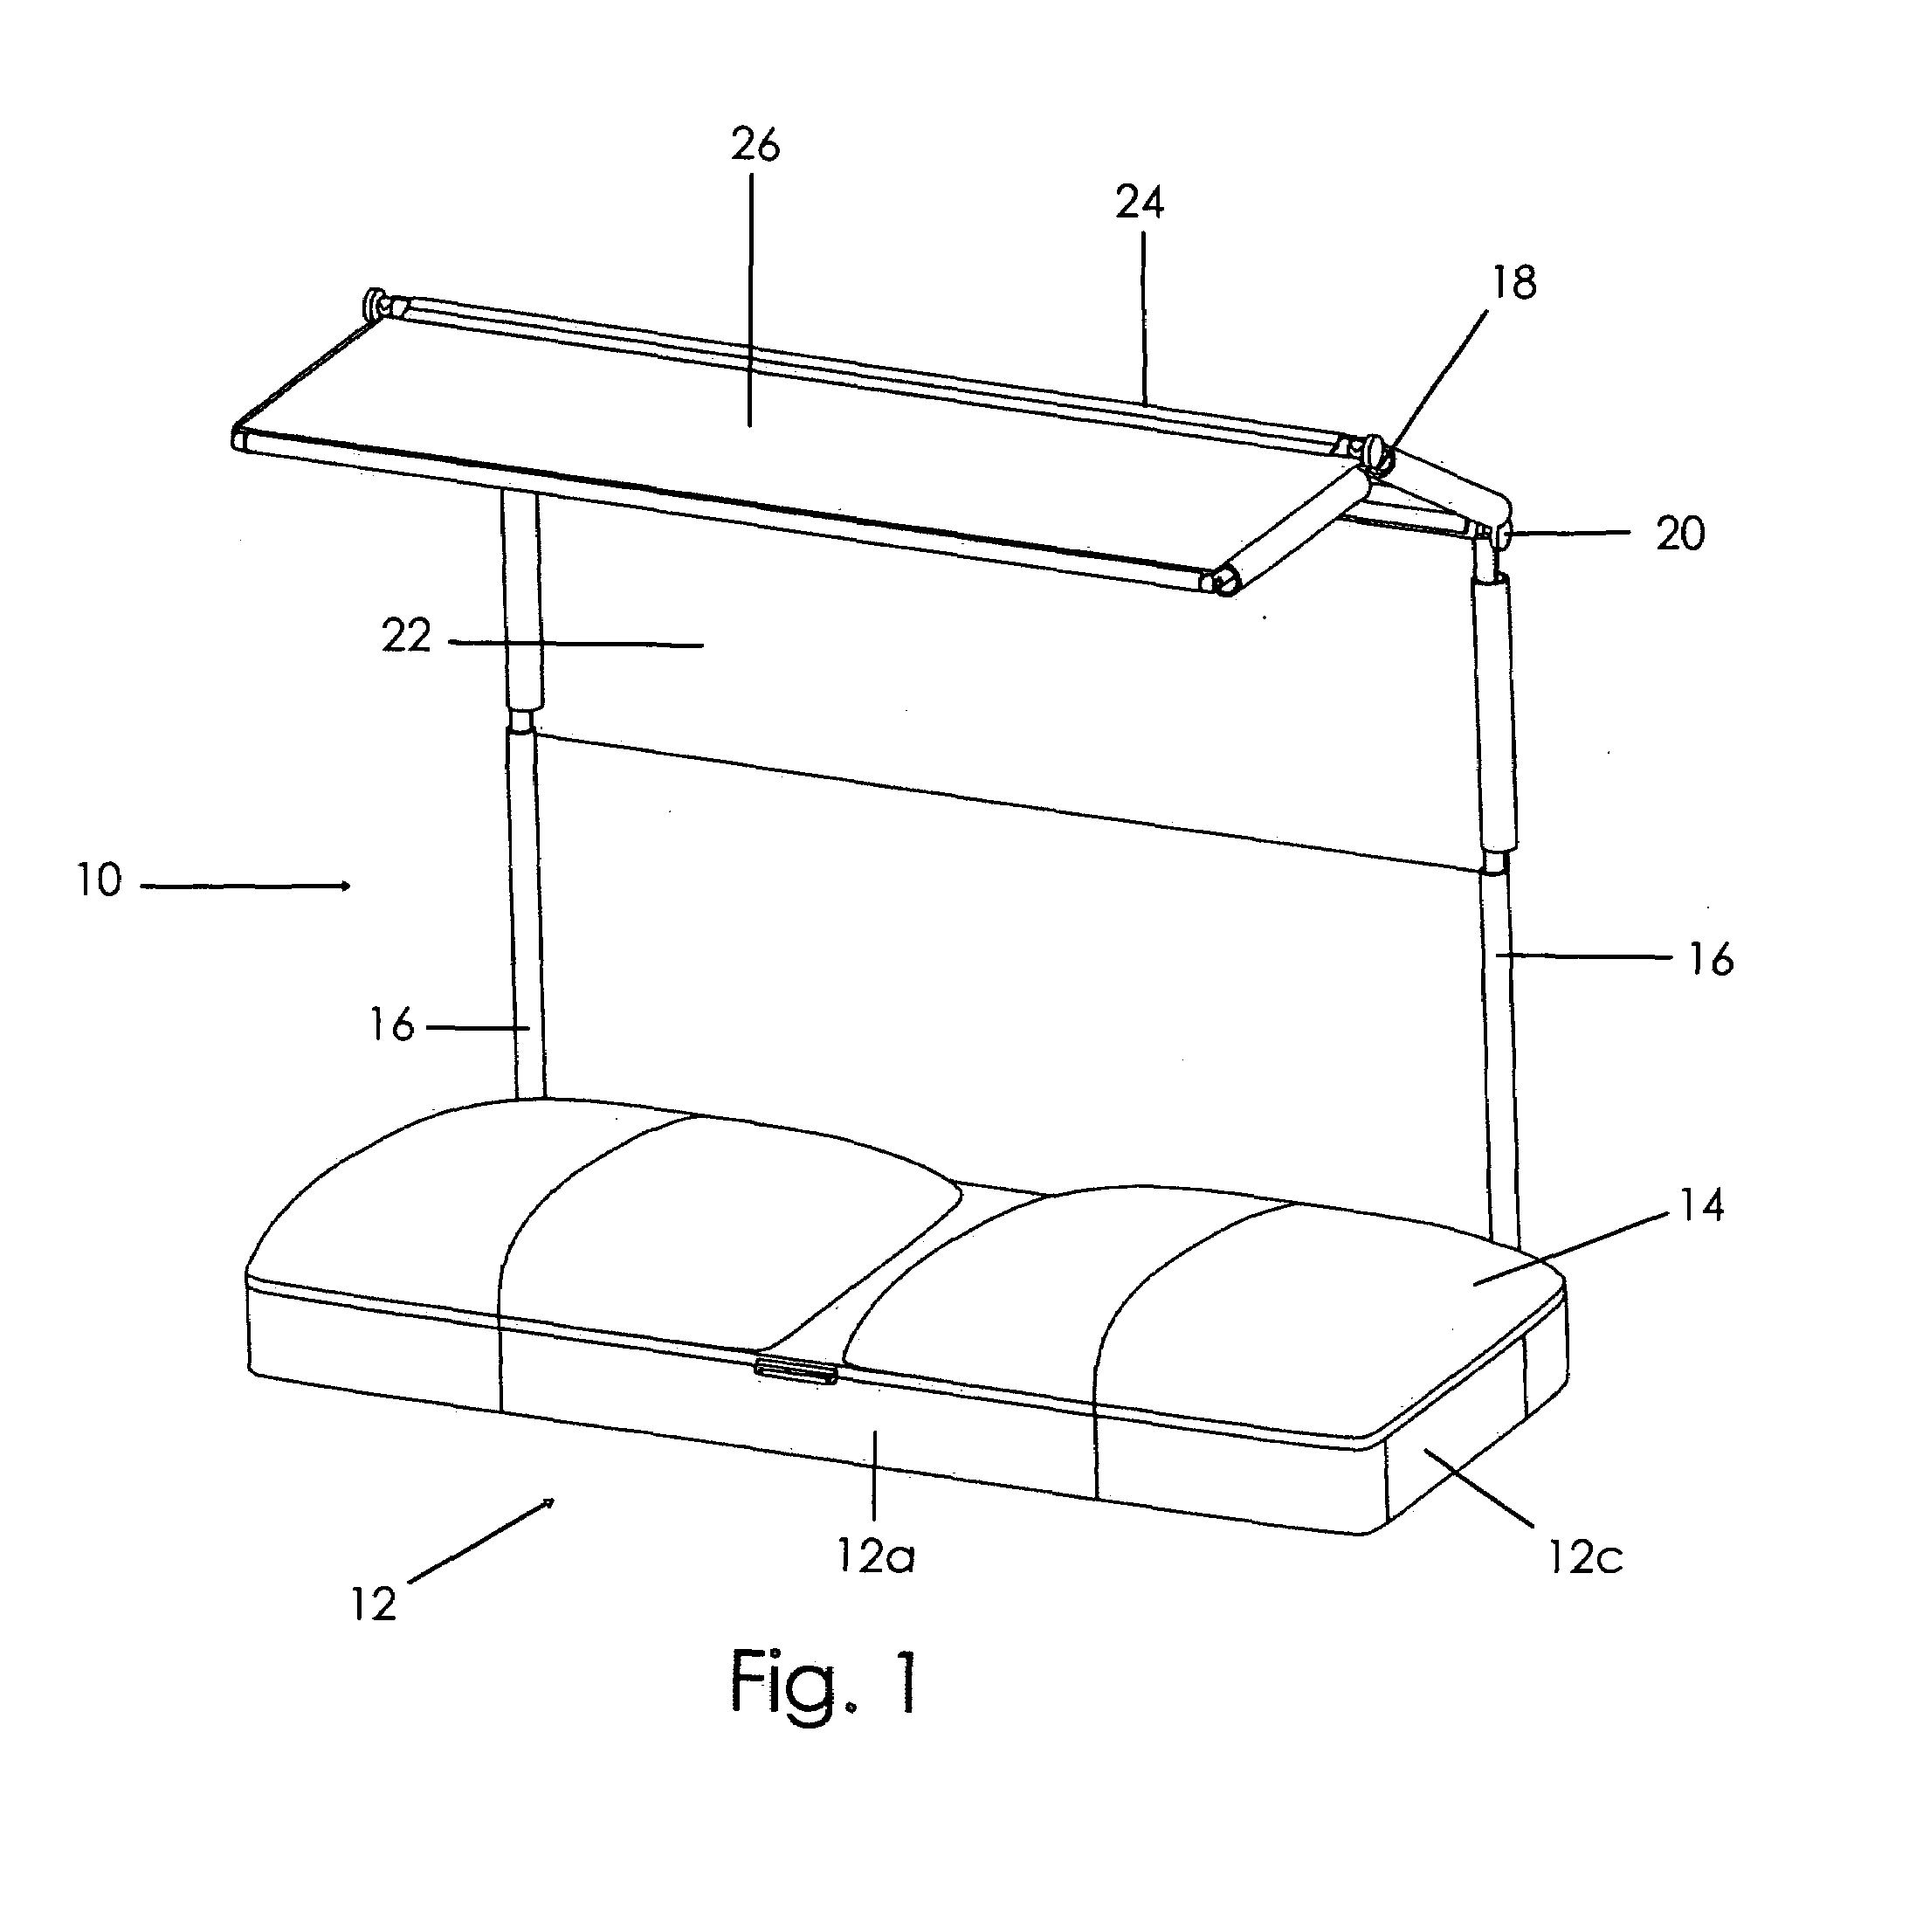 Portable covered seating apparatus